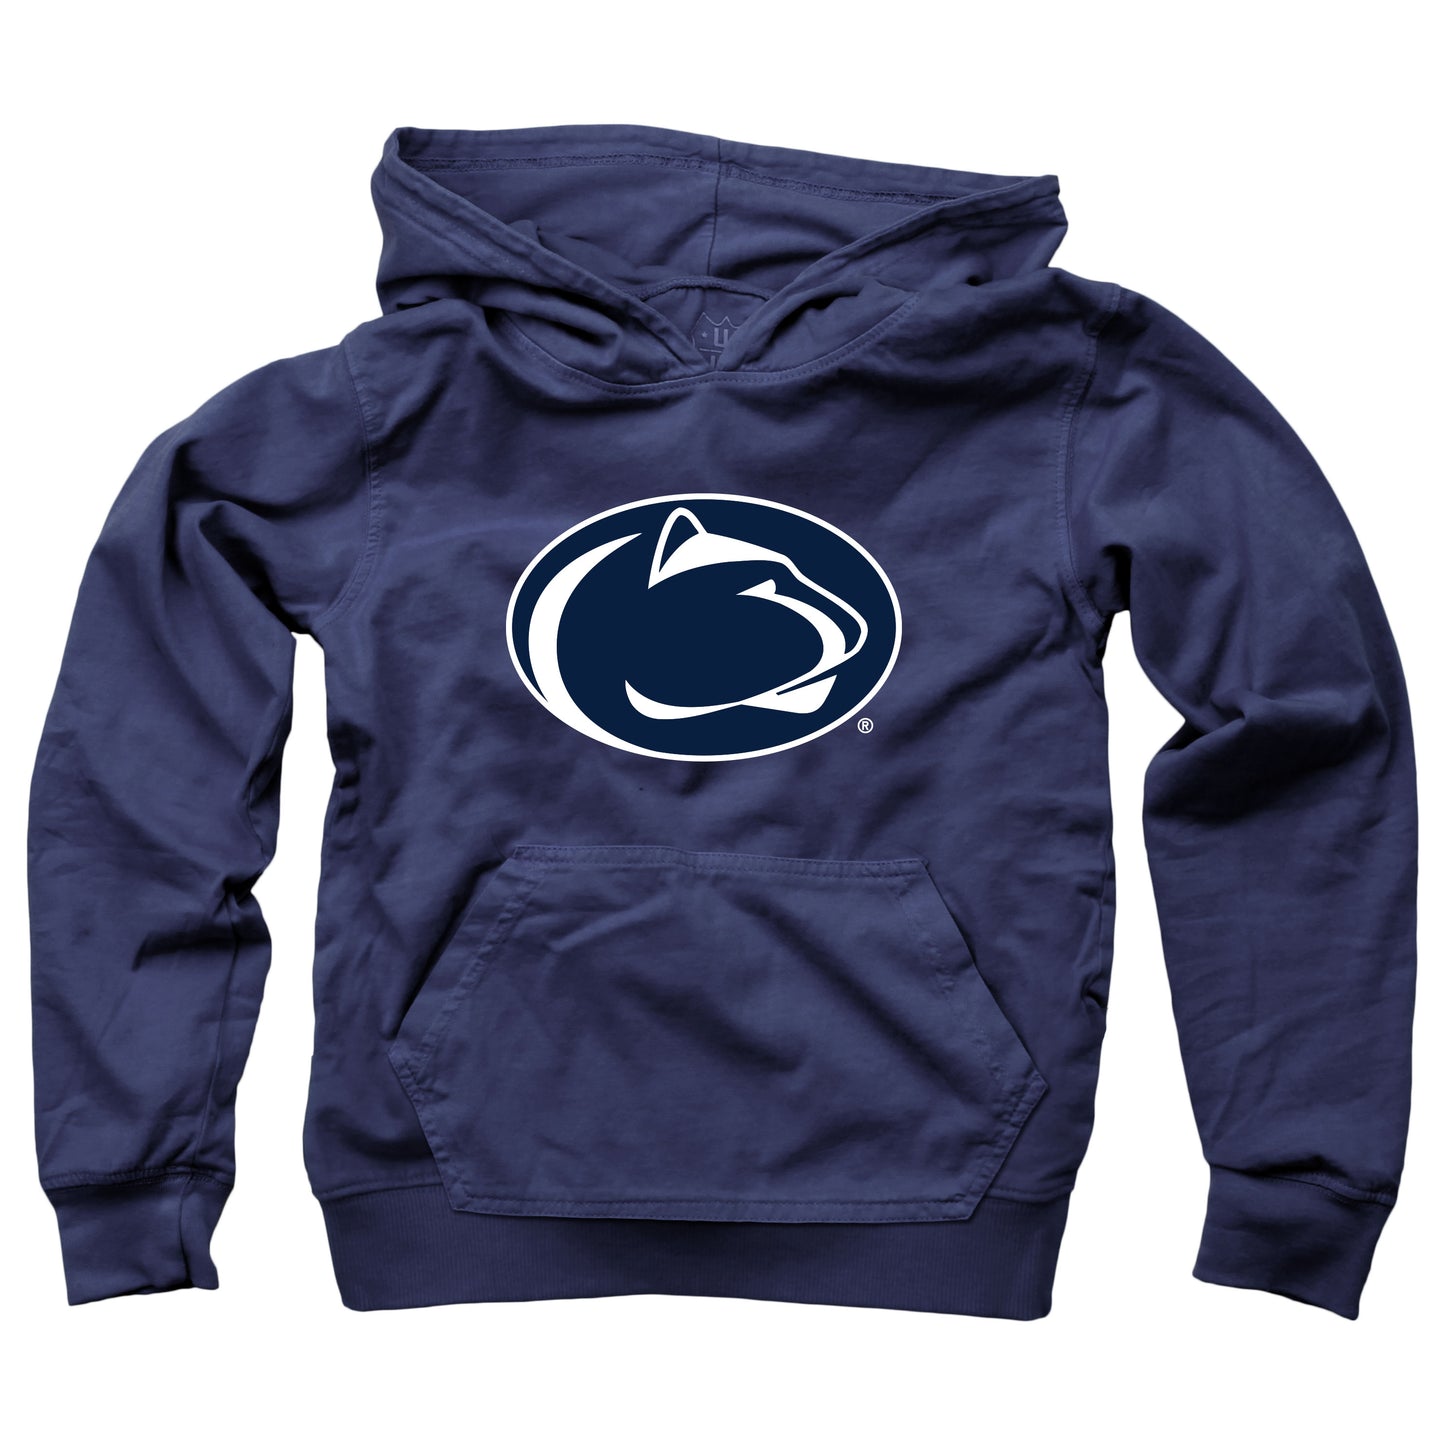 Penn State Nittany Lions Wes and Willy Youth Boys Team Logo Pullover Hoodie